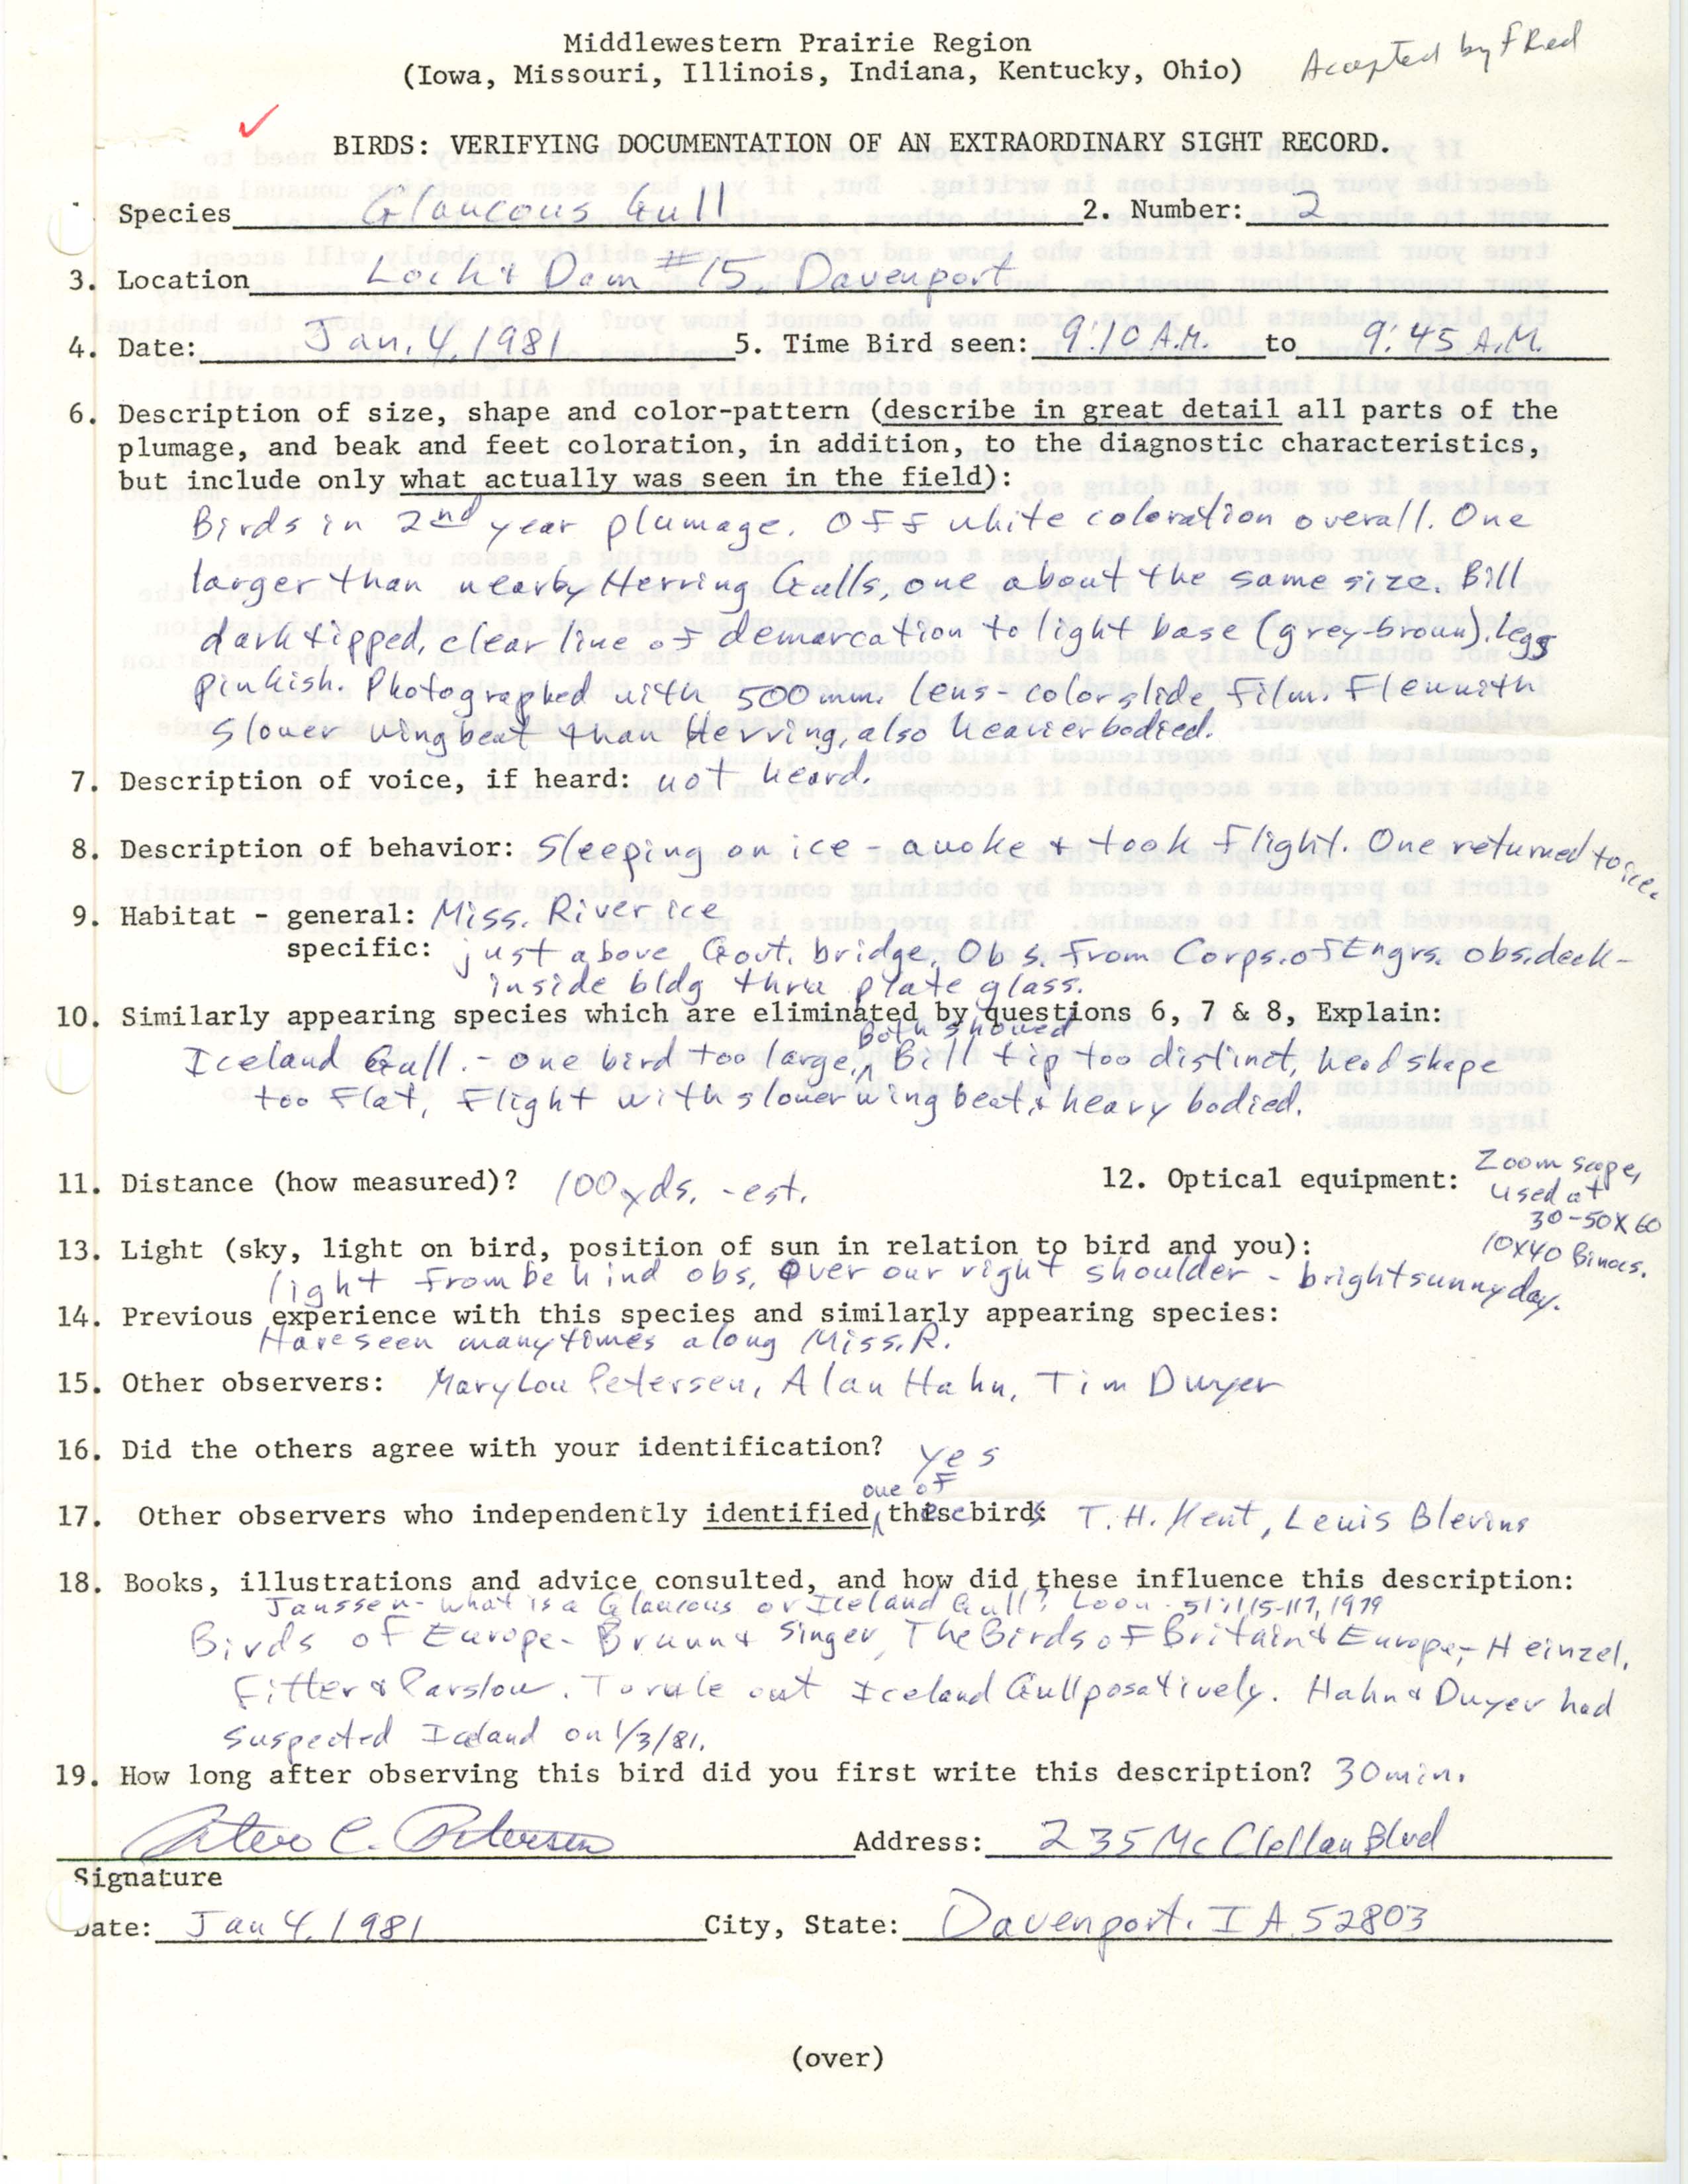 Rare bird documentation form for Glaucous Gull at Lock and Dam 15, 1981